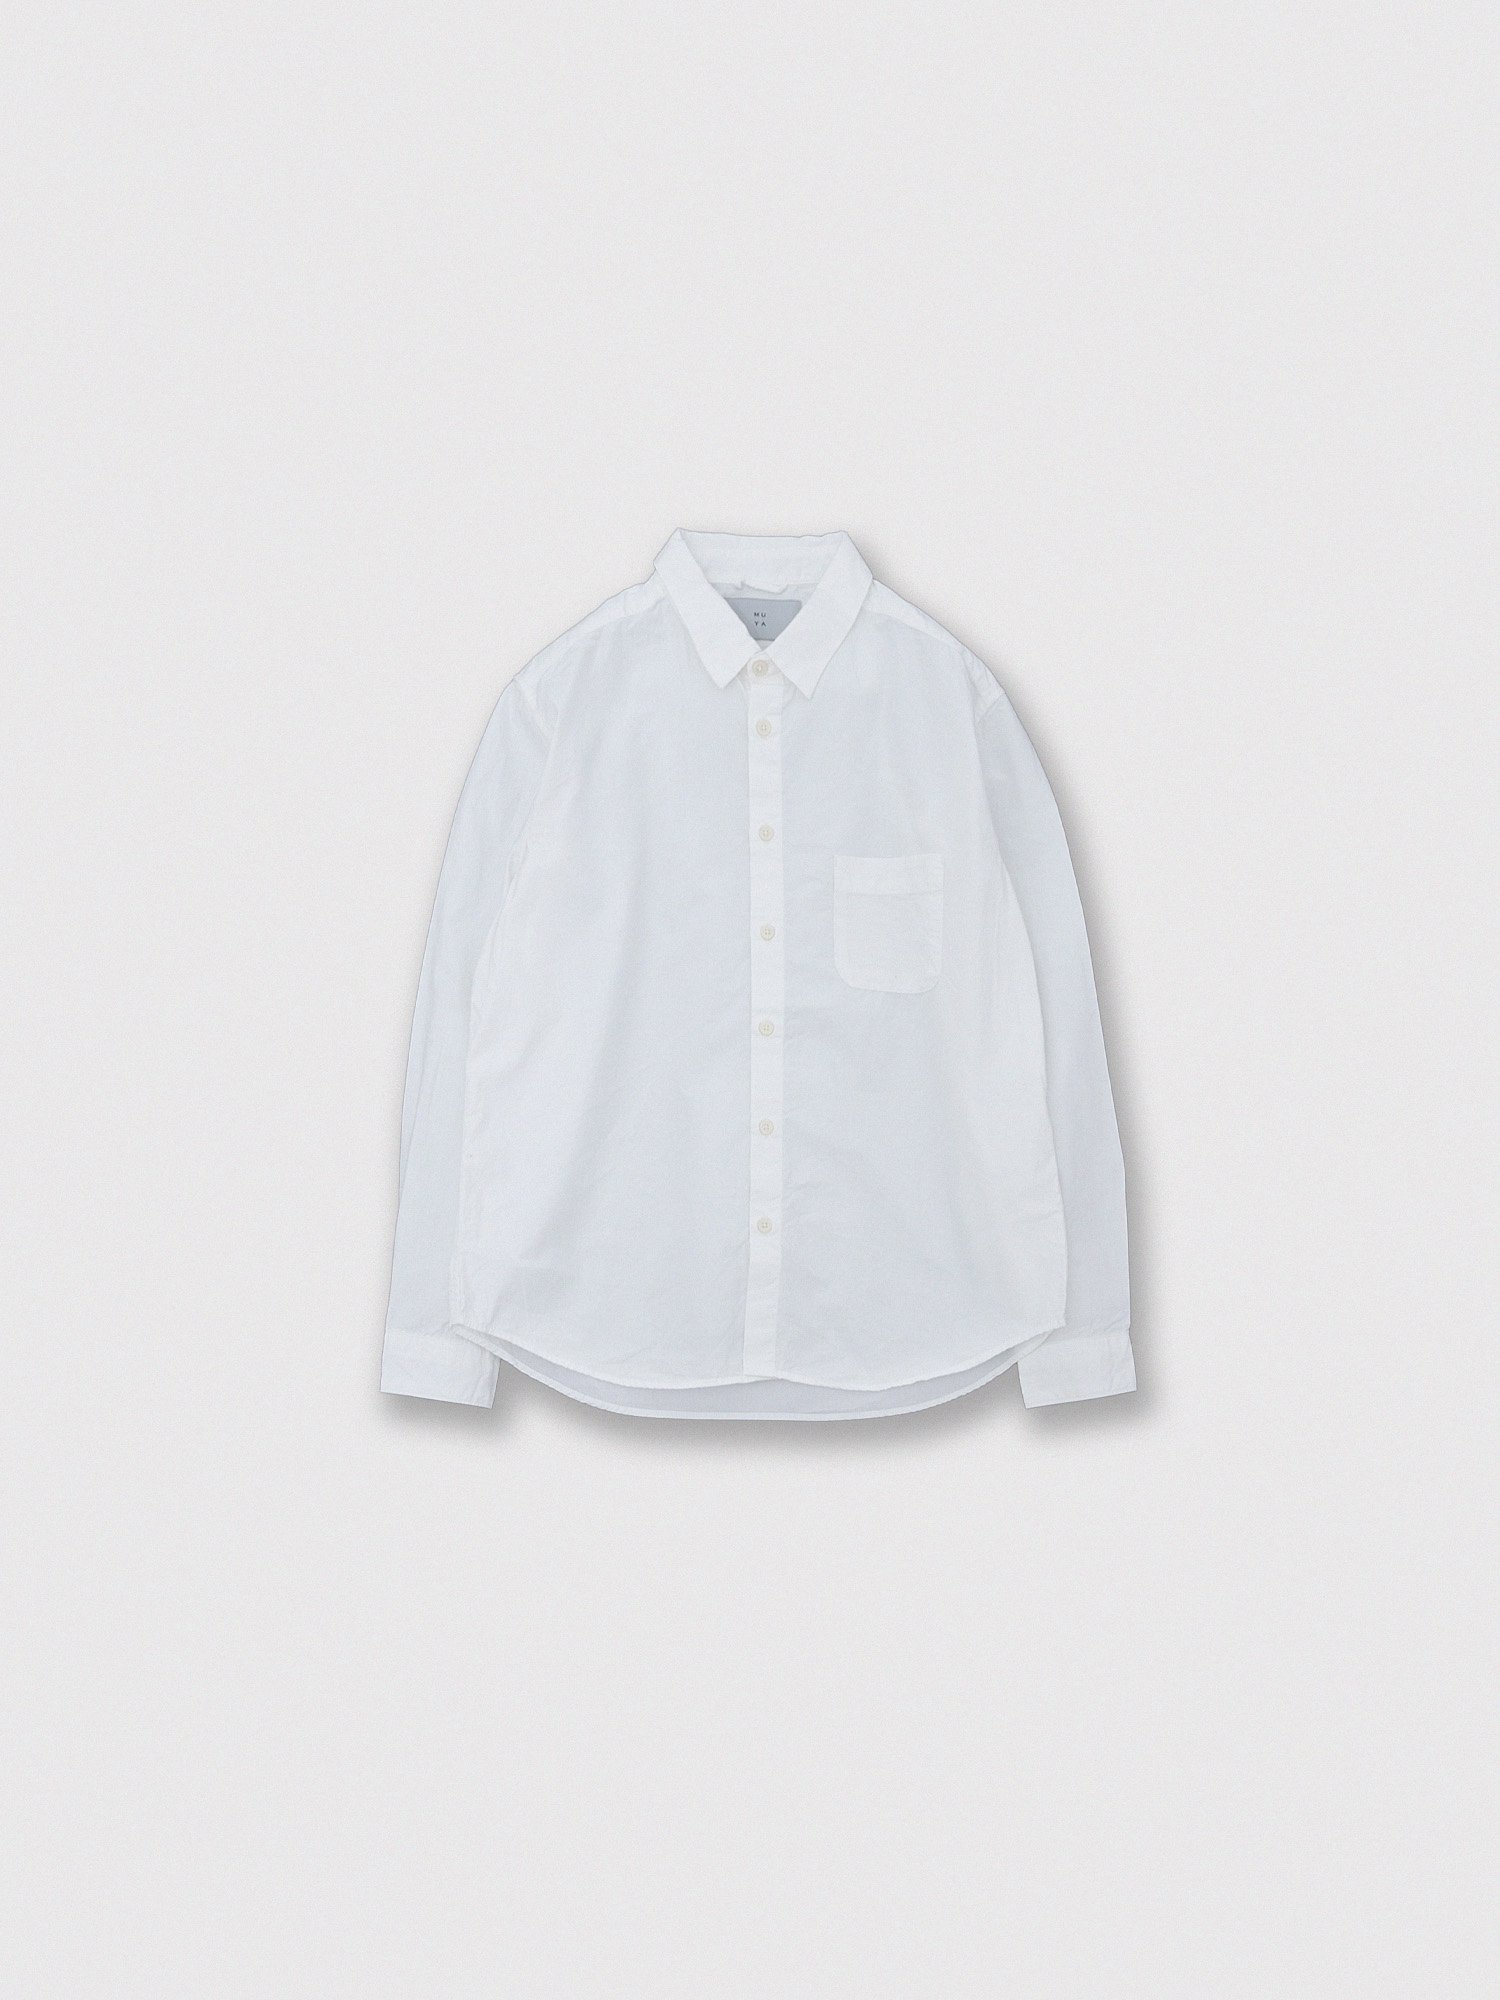 40/1 Atelier shirts relax 